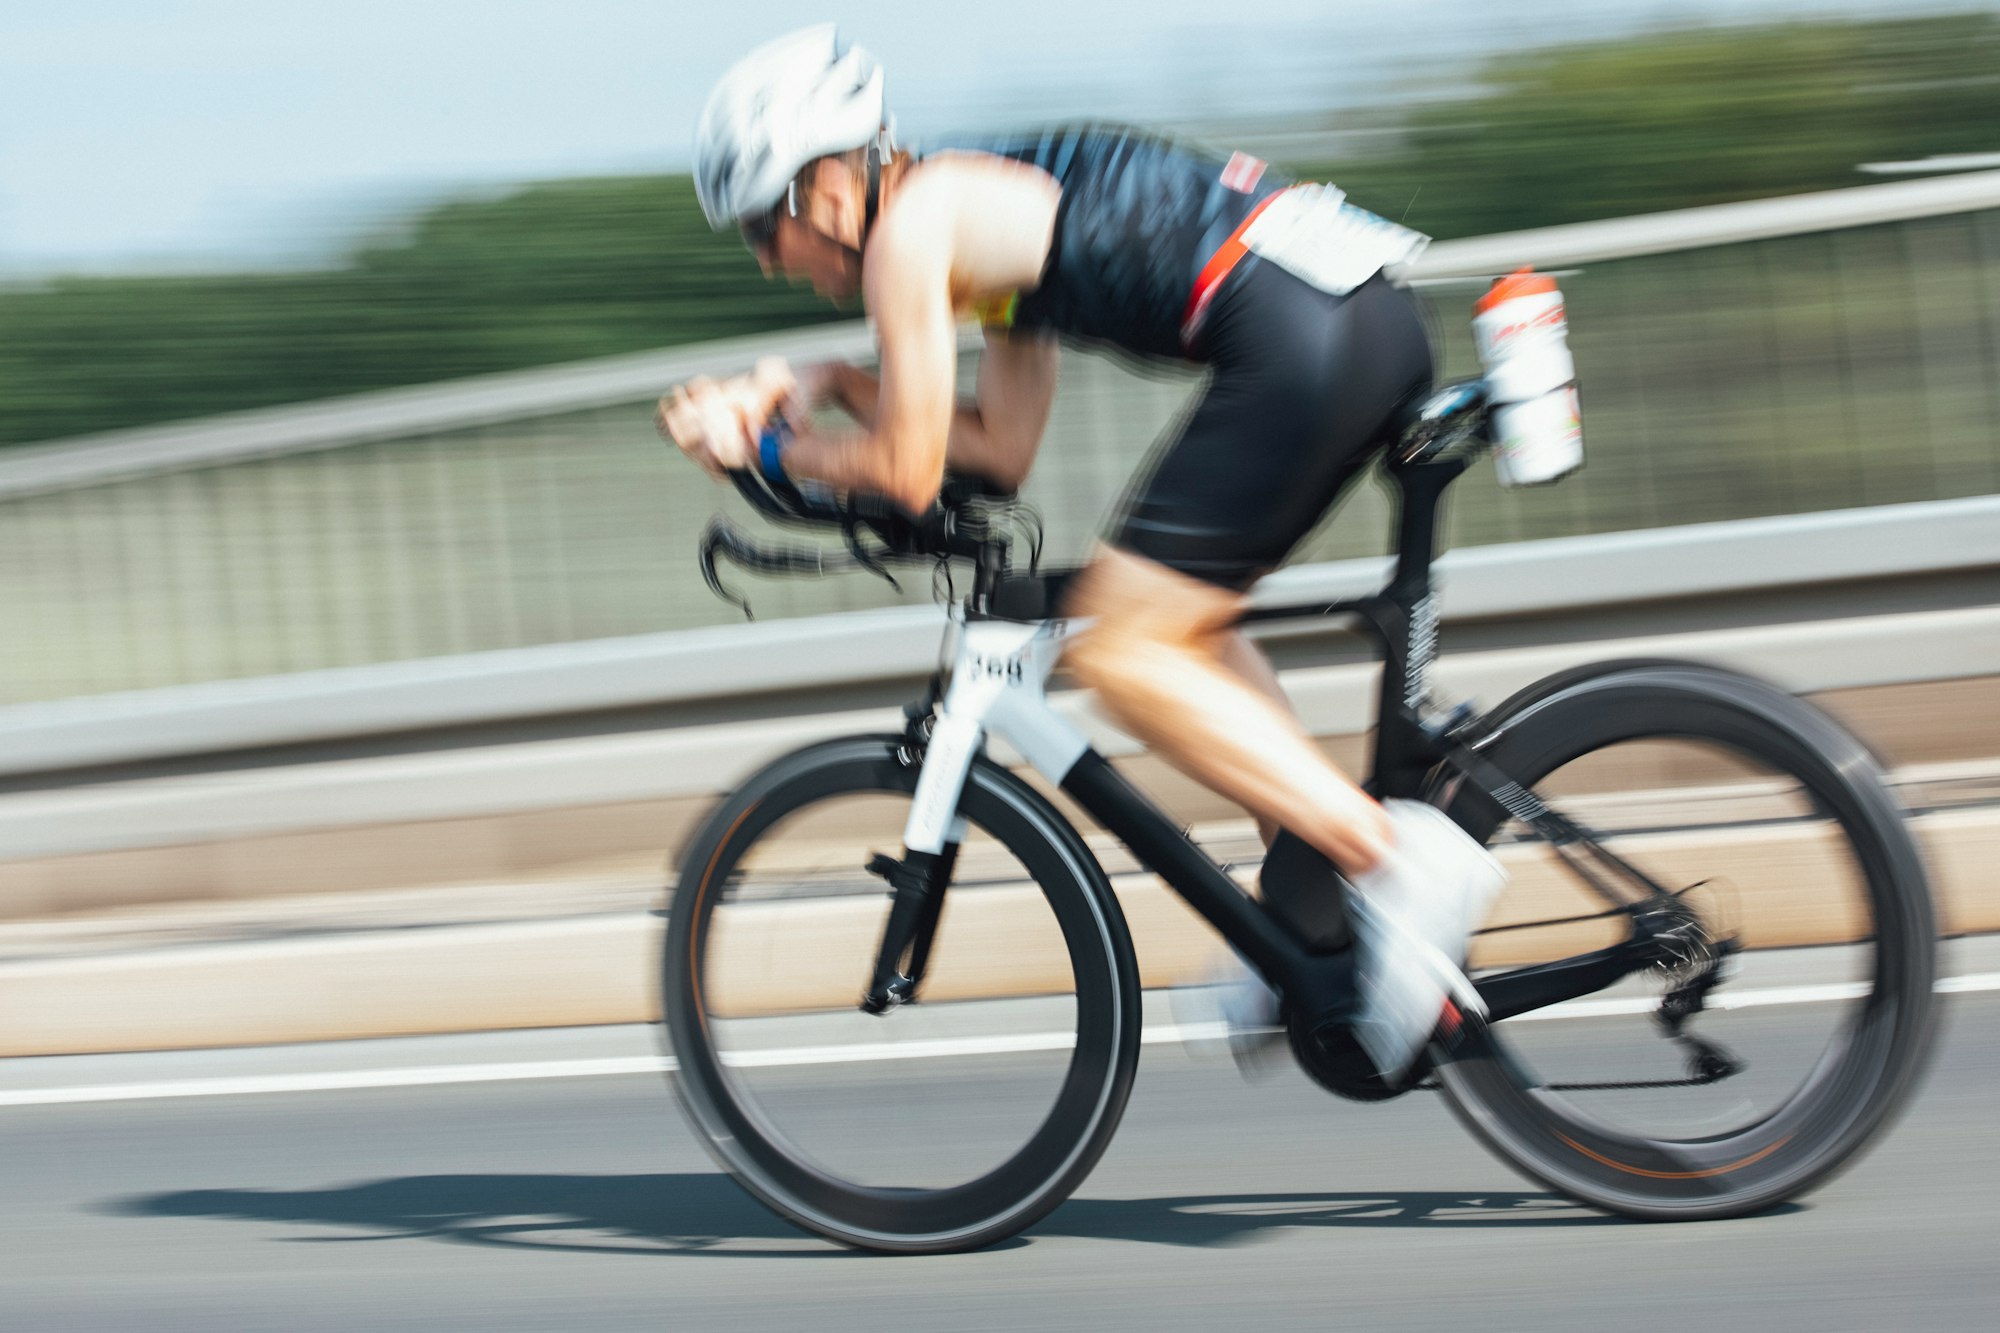 Triathlon competition – Road cycling